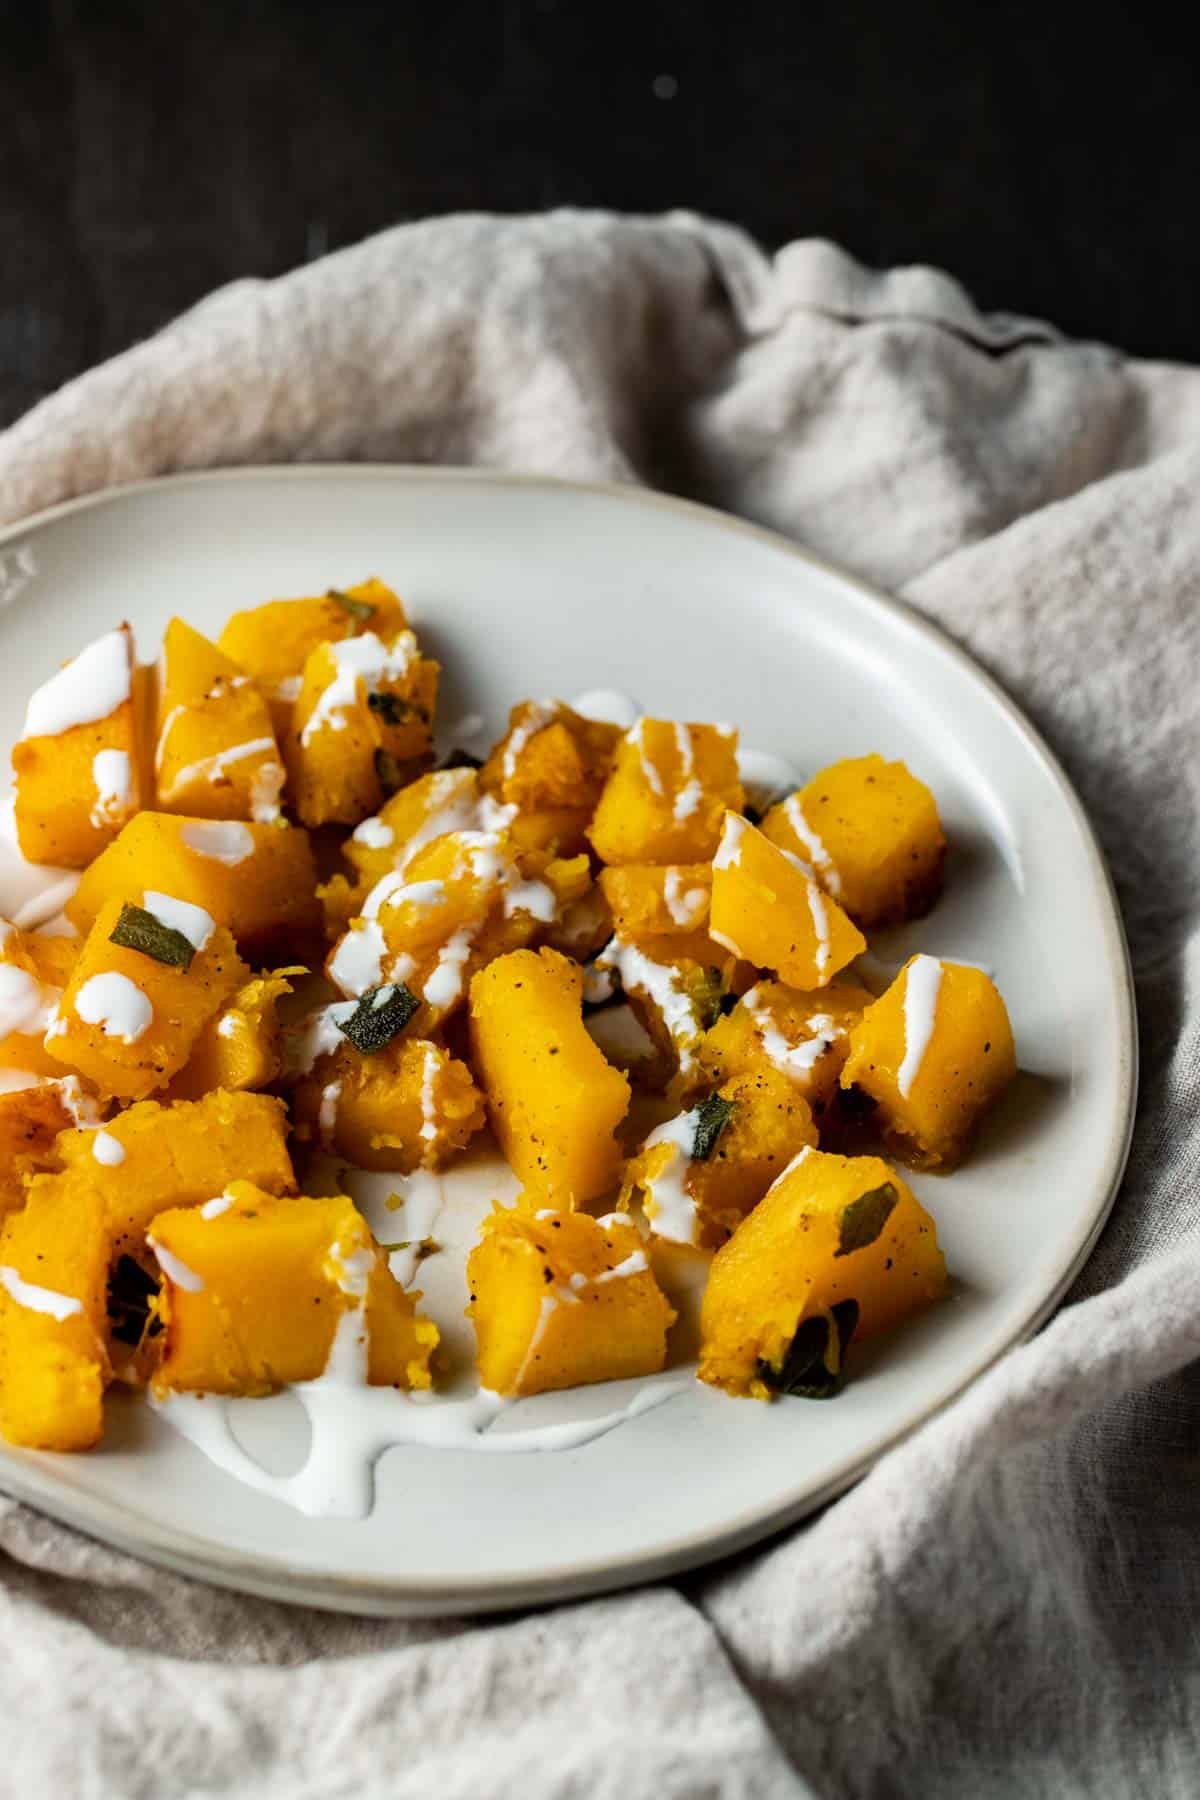 Cooked pumpkin cubes on a white plate on top of a grey cloth.